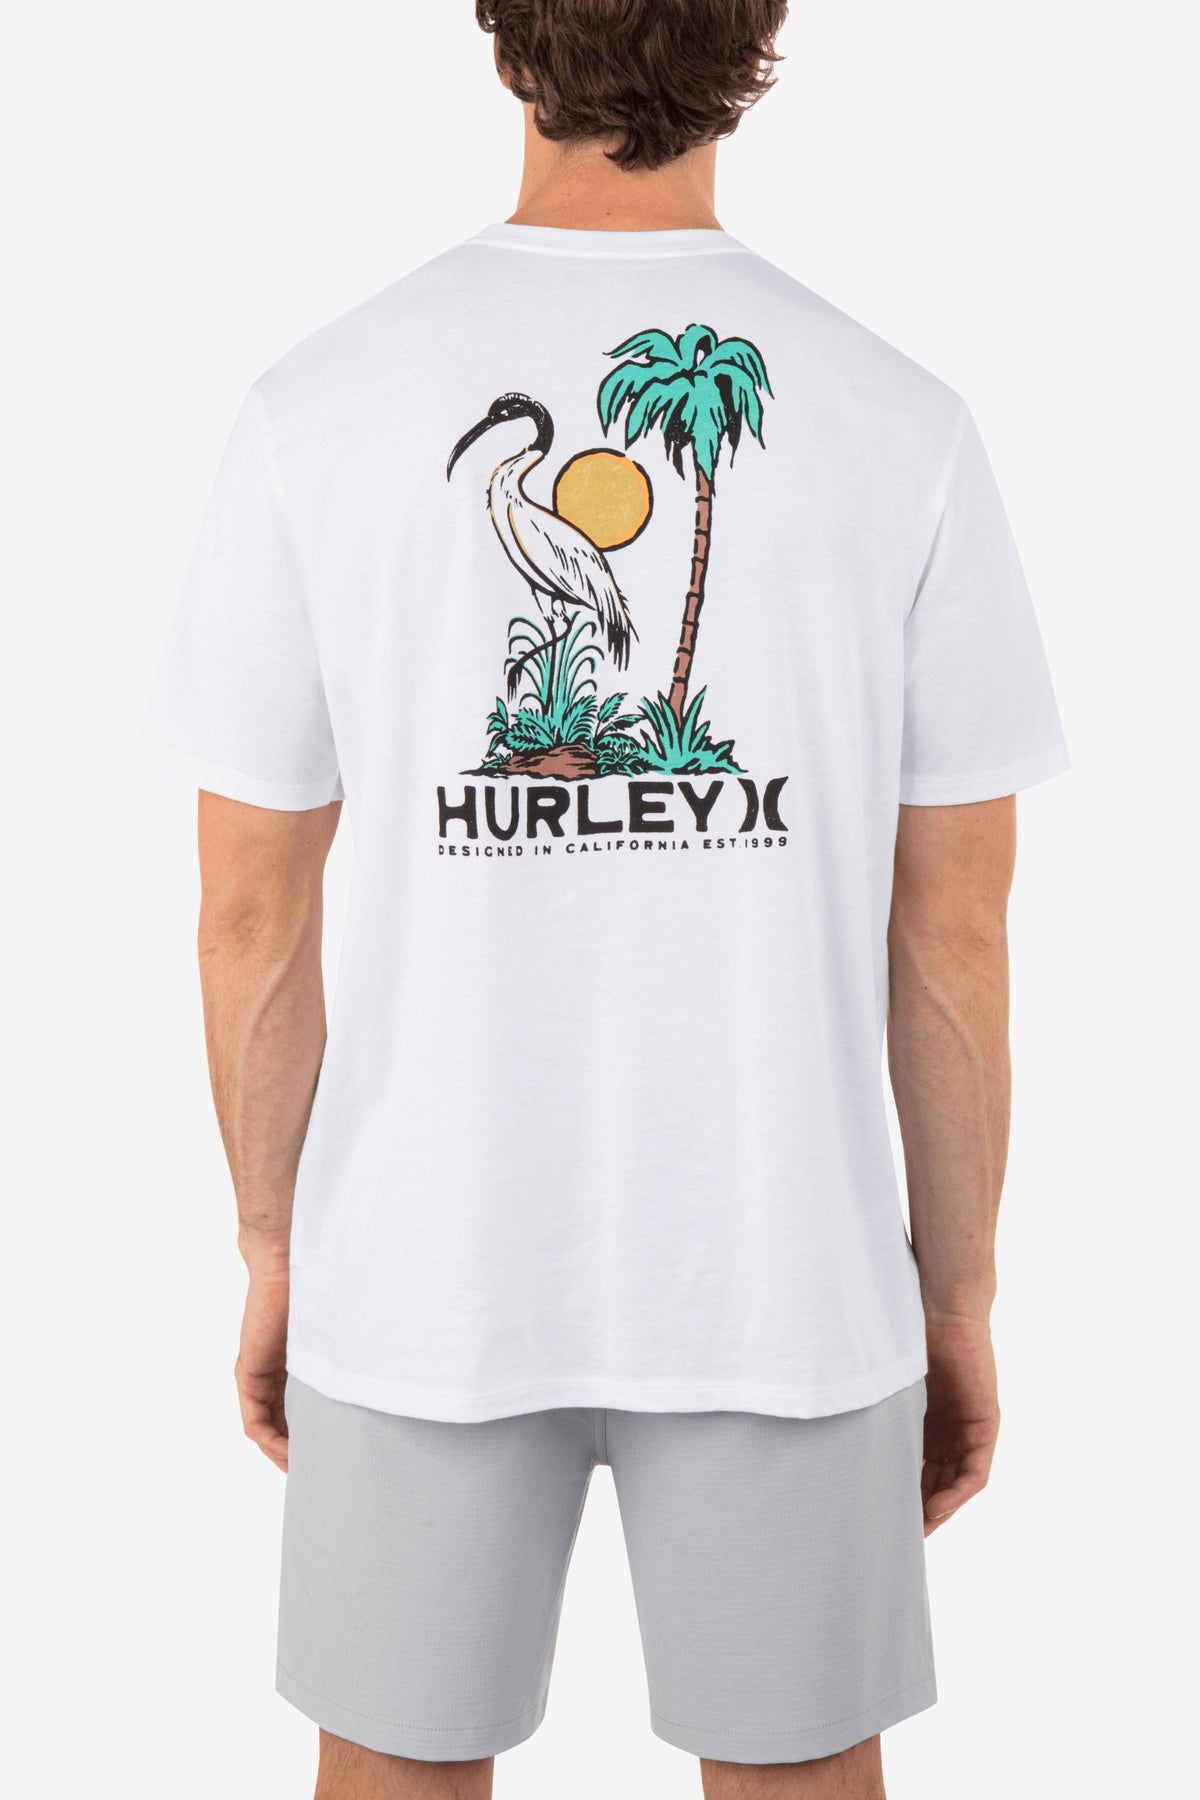 T-SHIRT HOMME-EVERYDAY STORK PALM